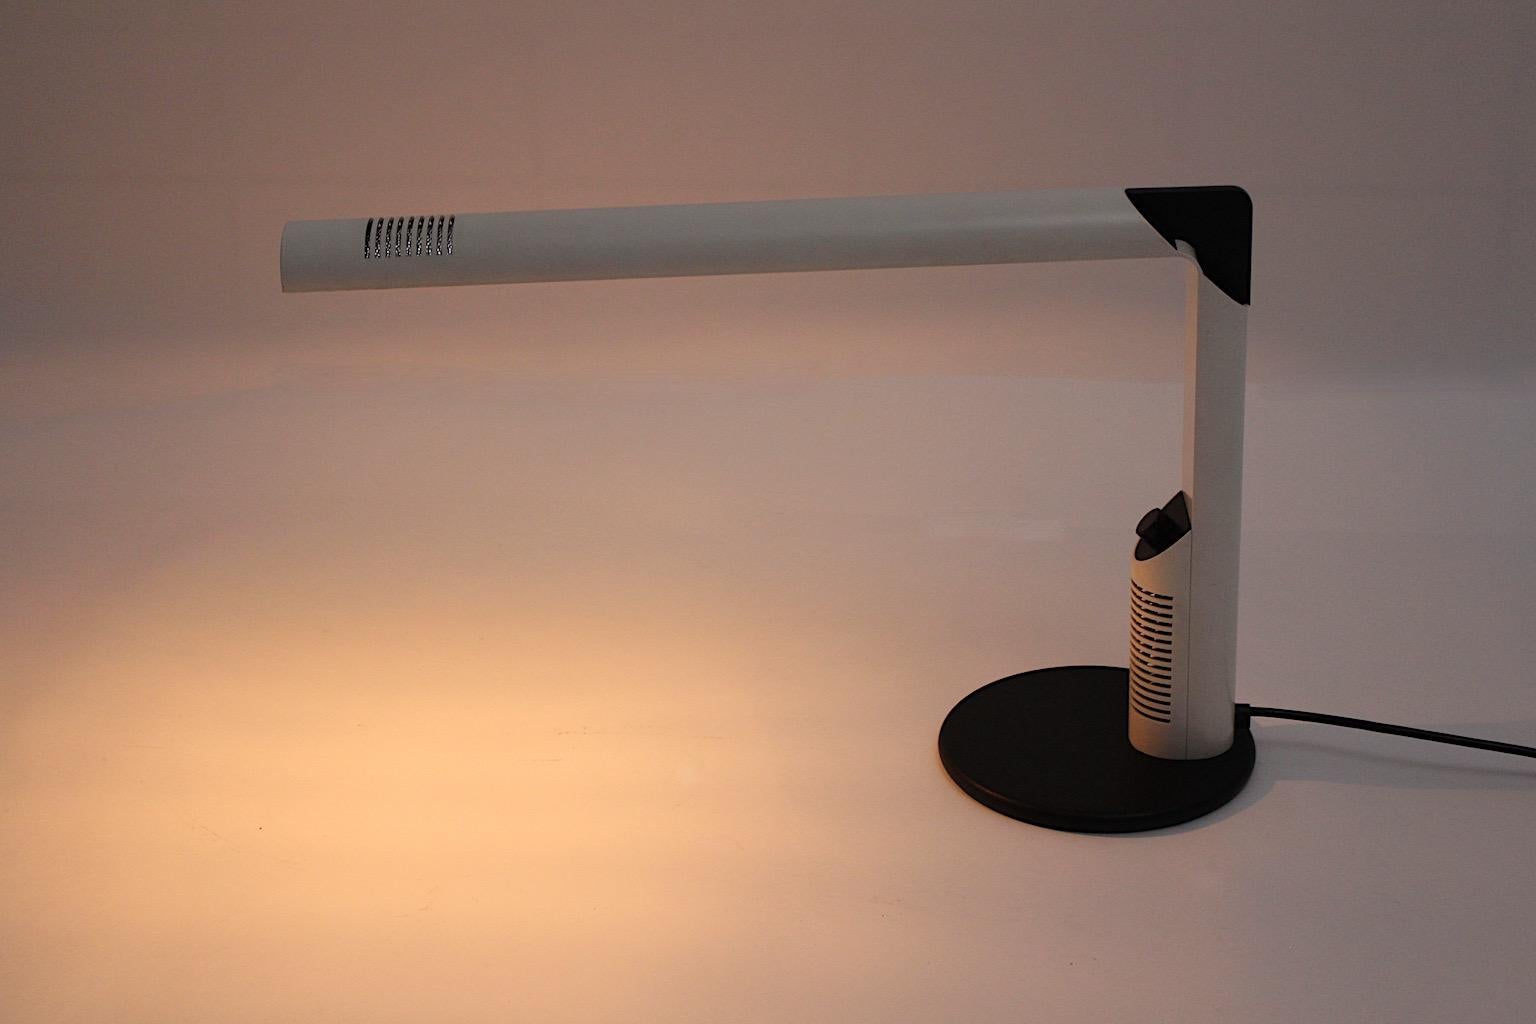 Space Age Vintage White Table Lamp Desk Lamp Gianfranco Frattini, 1970s, Italy For Sale 7